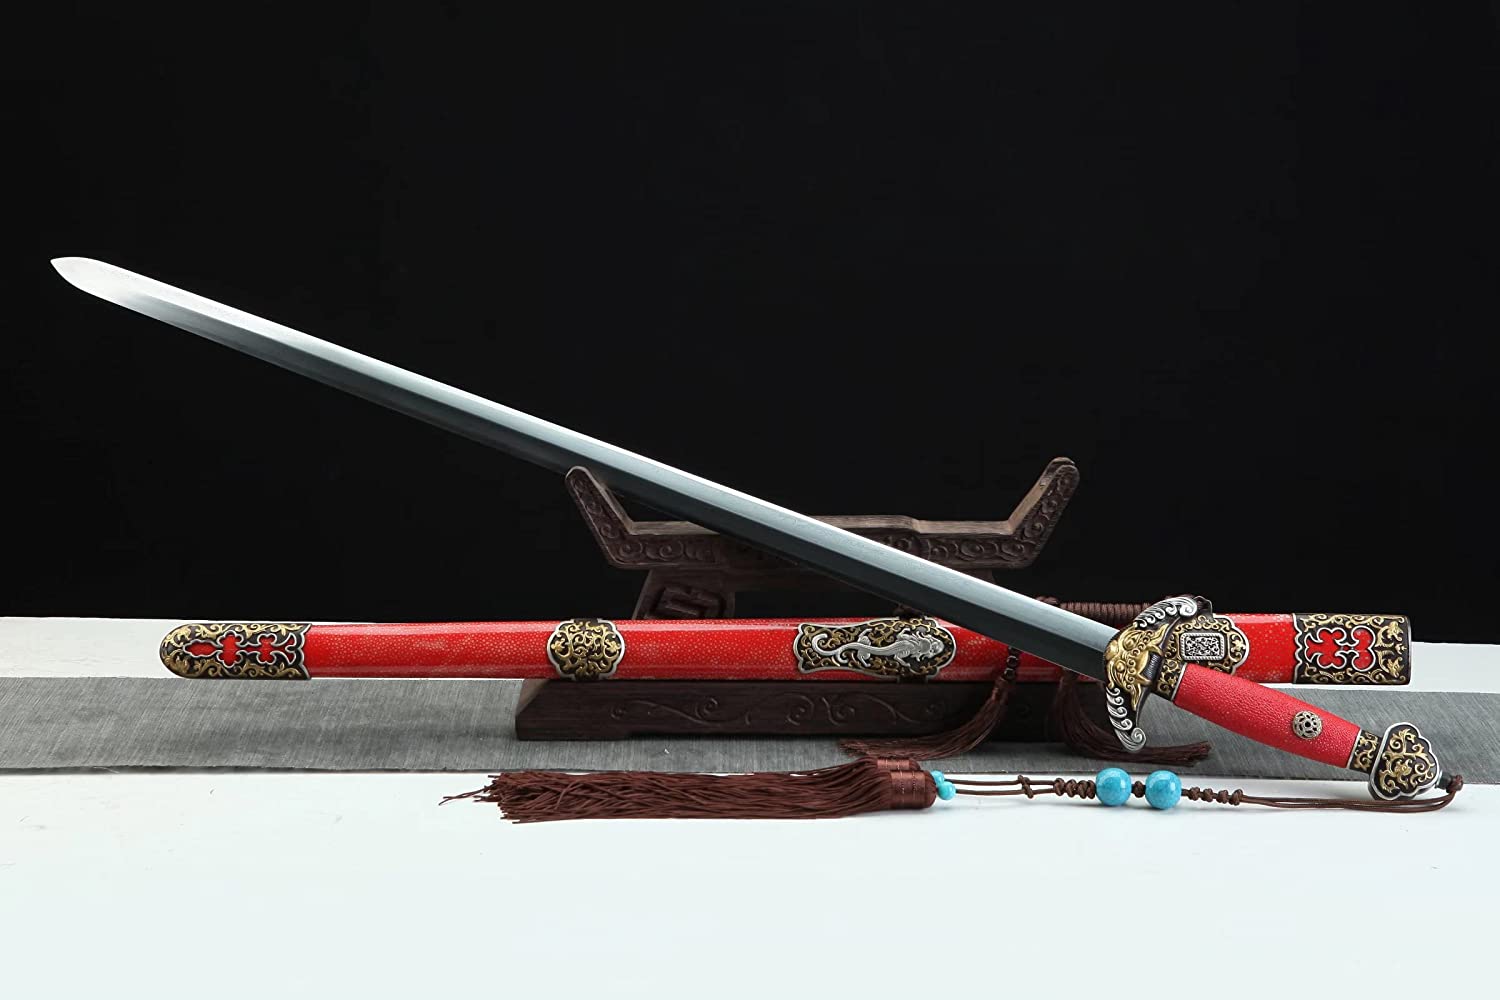 Qianlong Swords,Damascus Steel Blades,Red Skin Scabbard,Brass Fittings,Chinese sword